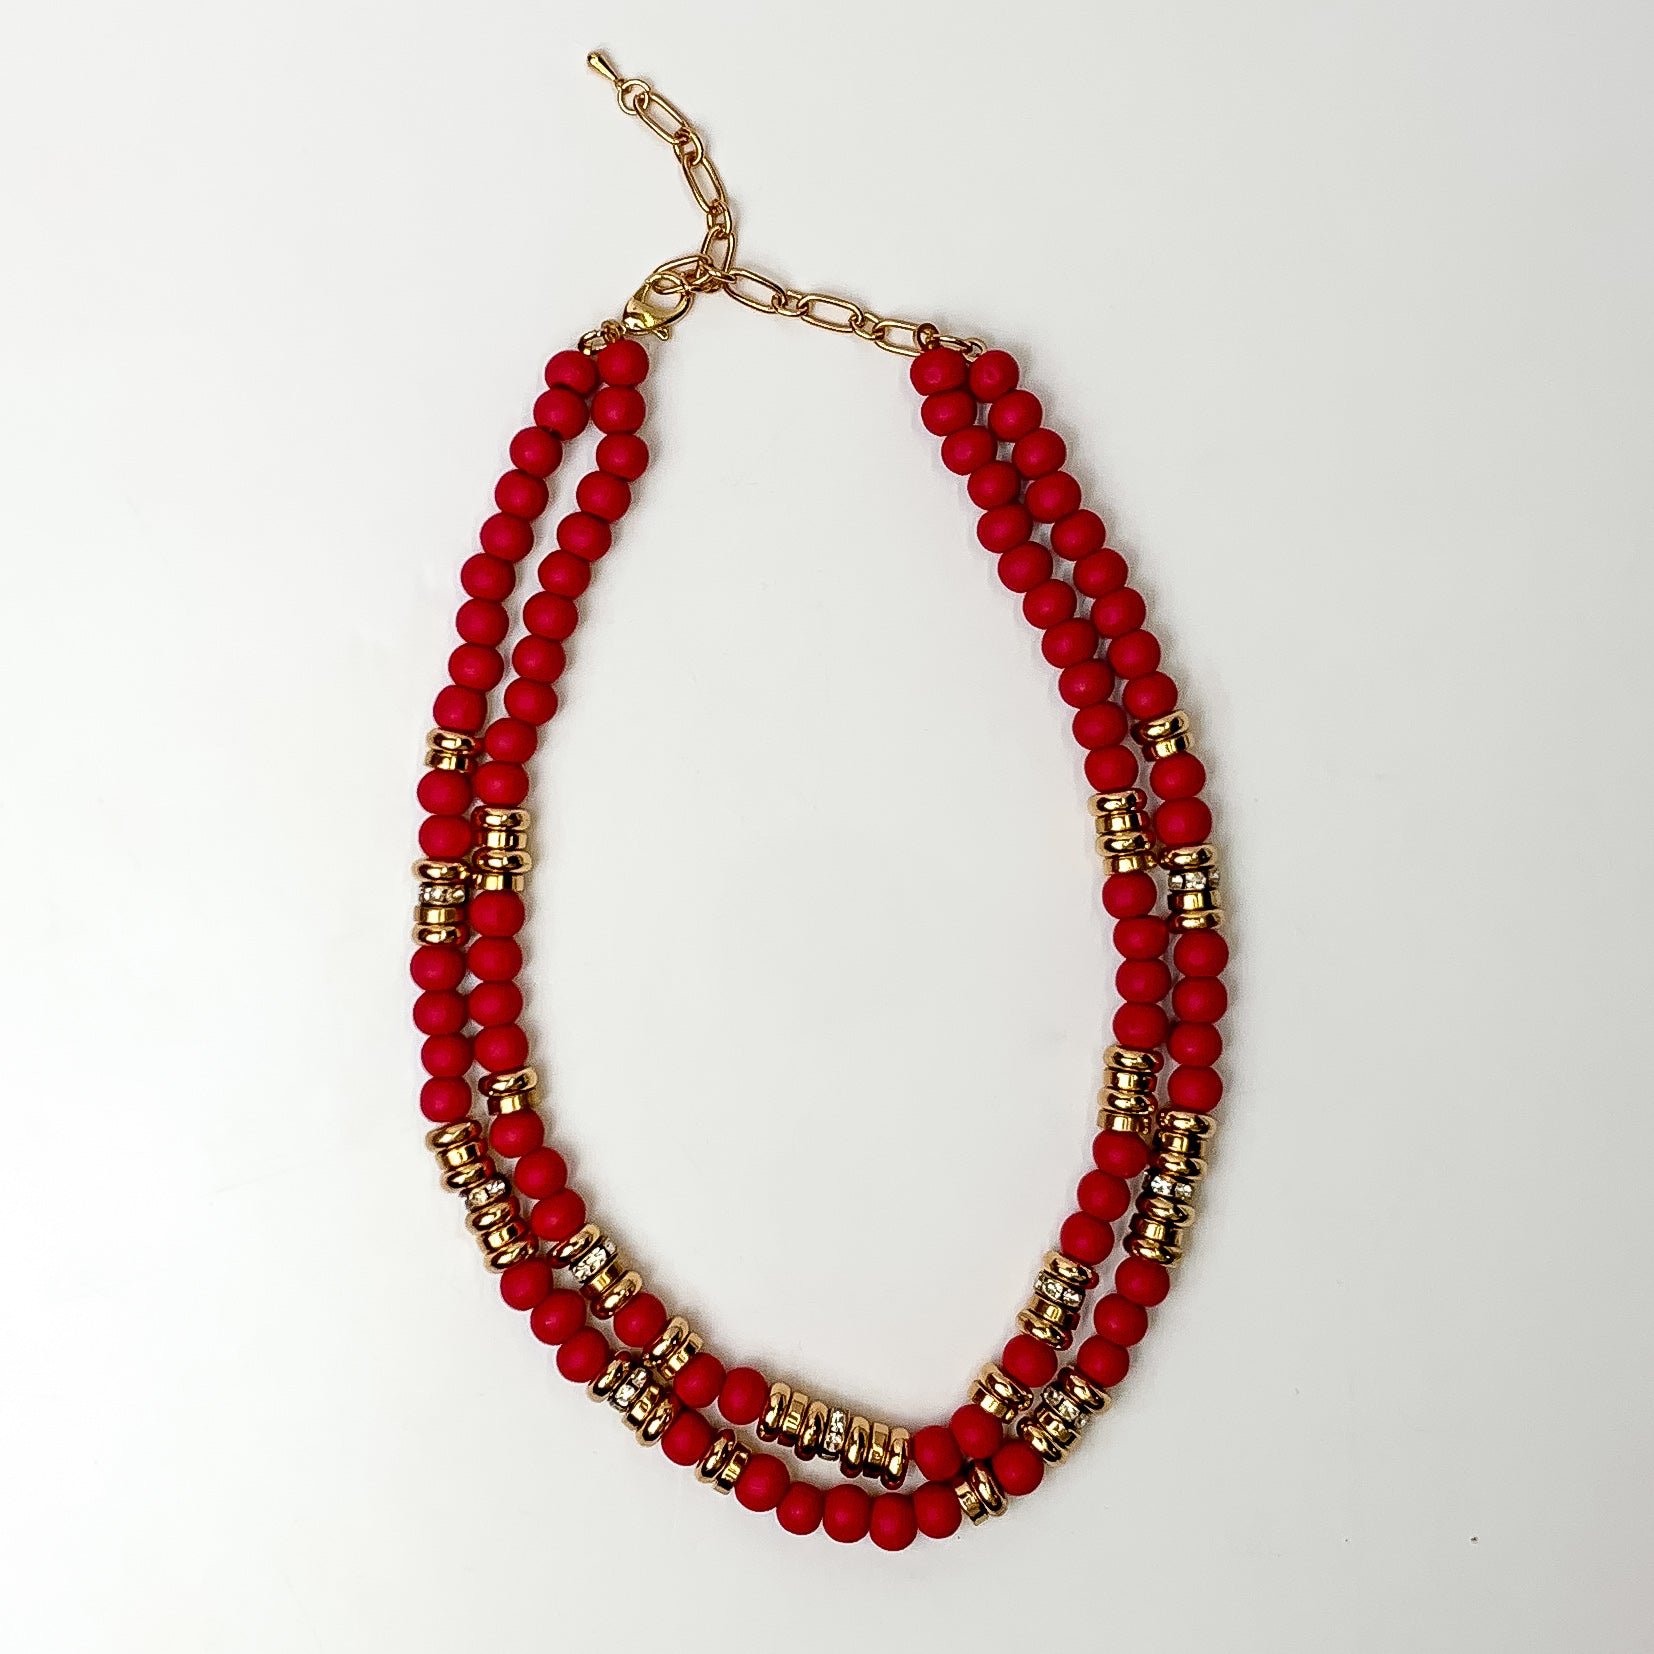 This layered necklace in red has gold spacers. It is taken with a white background.